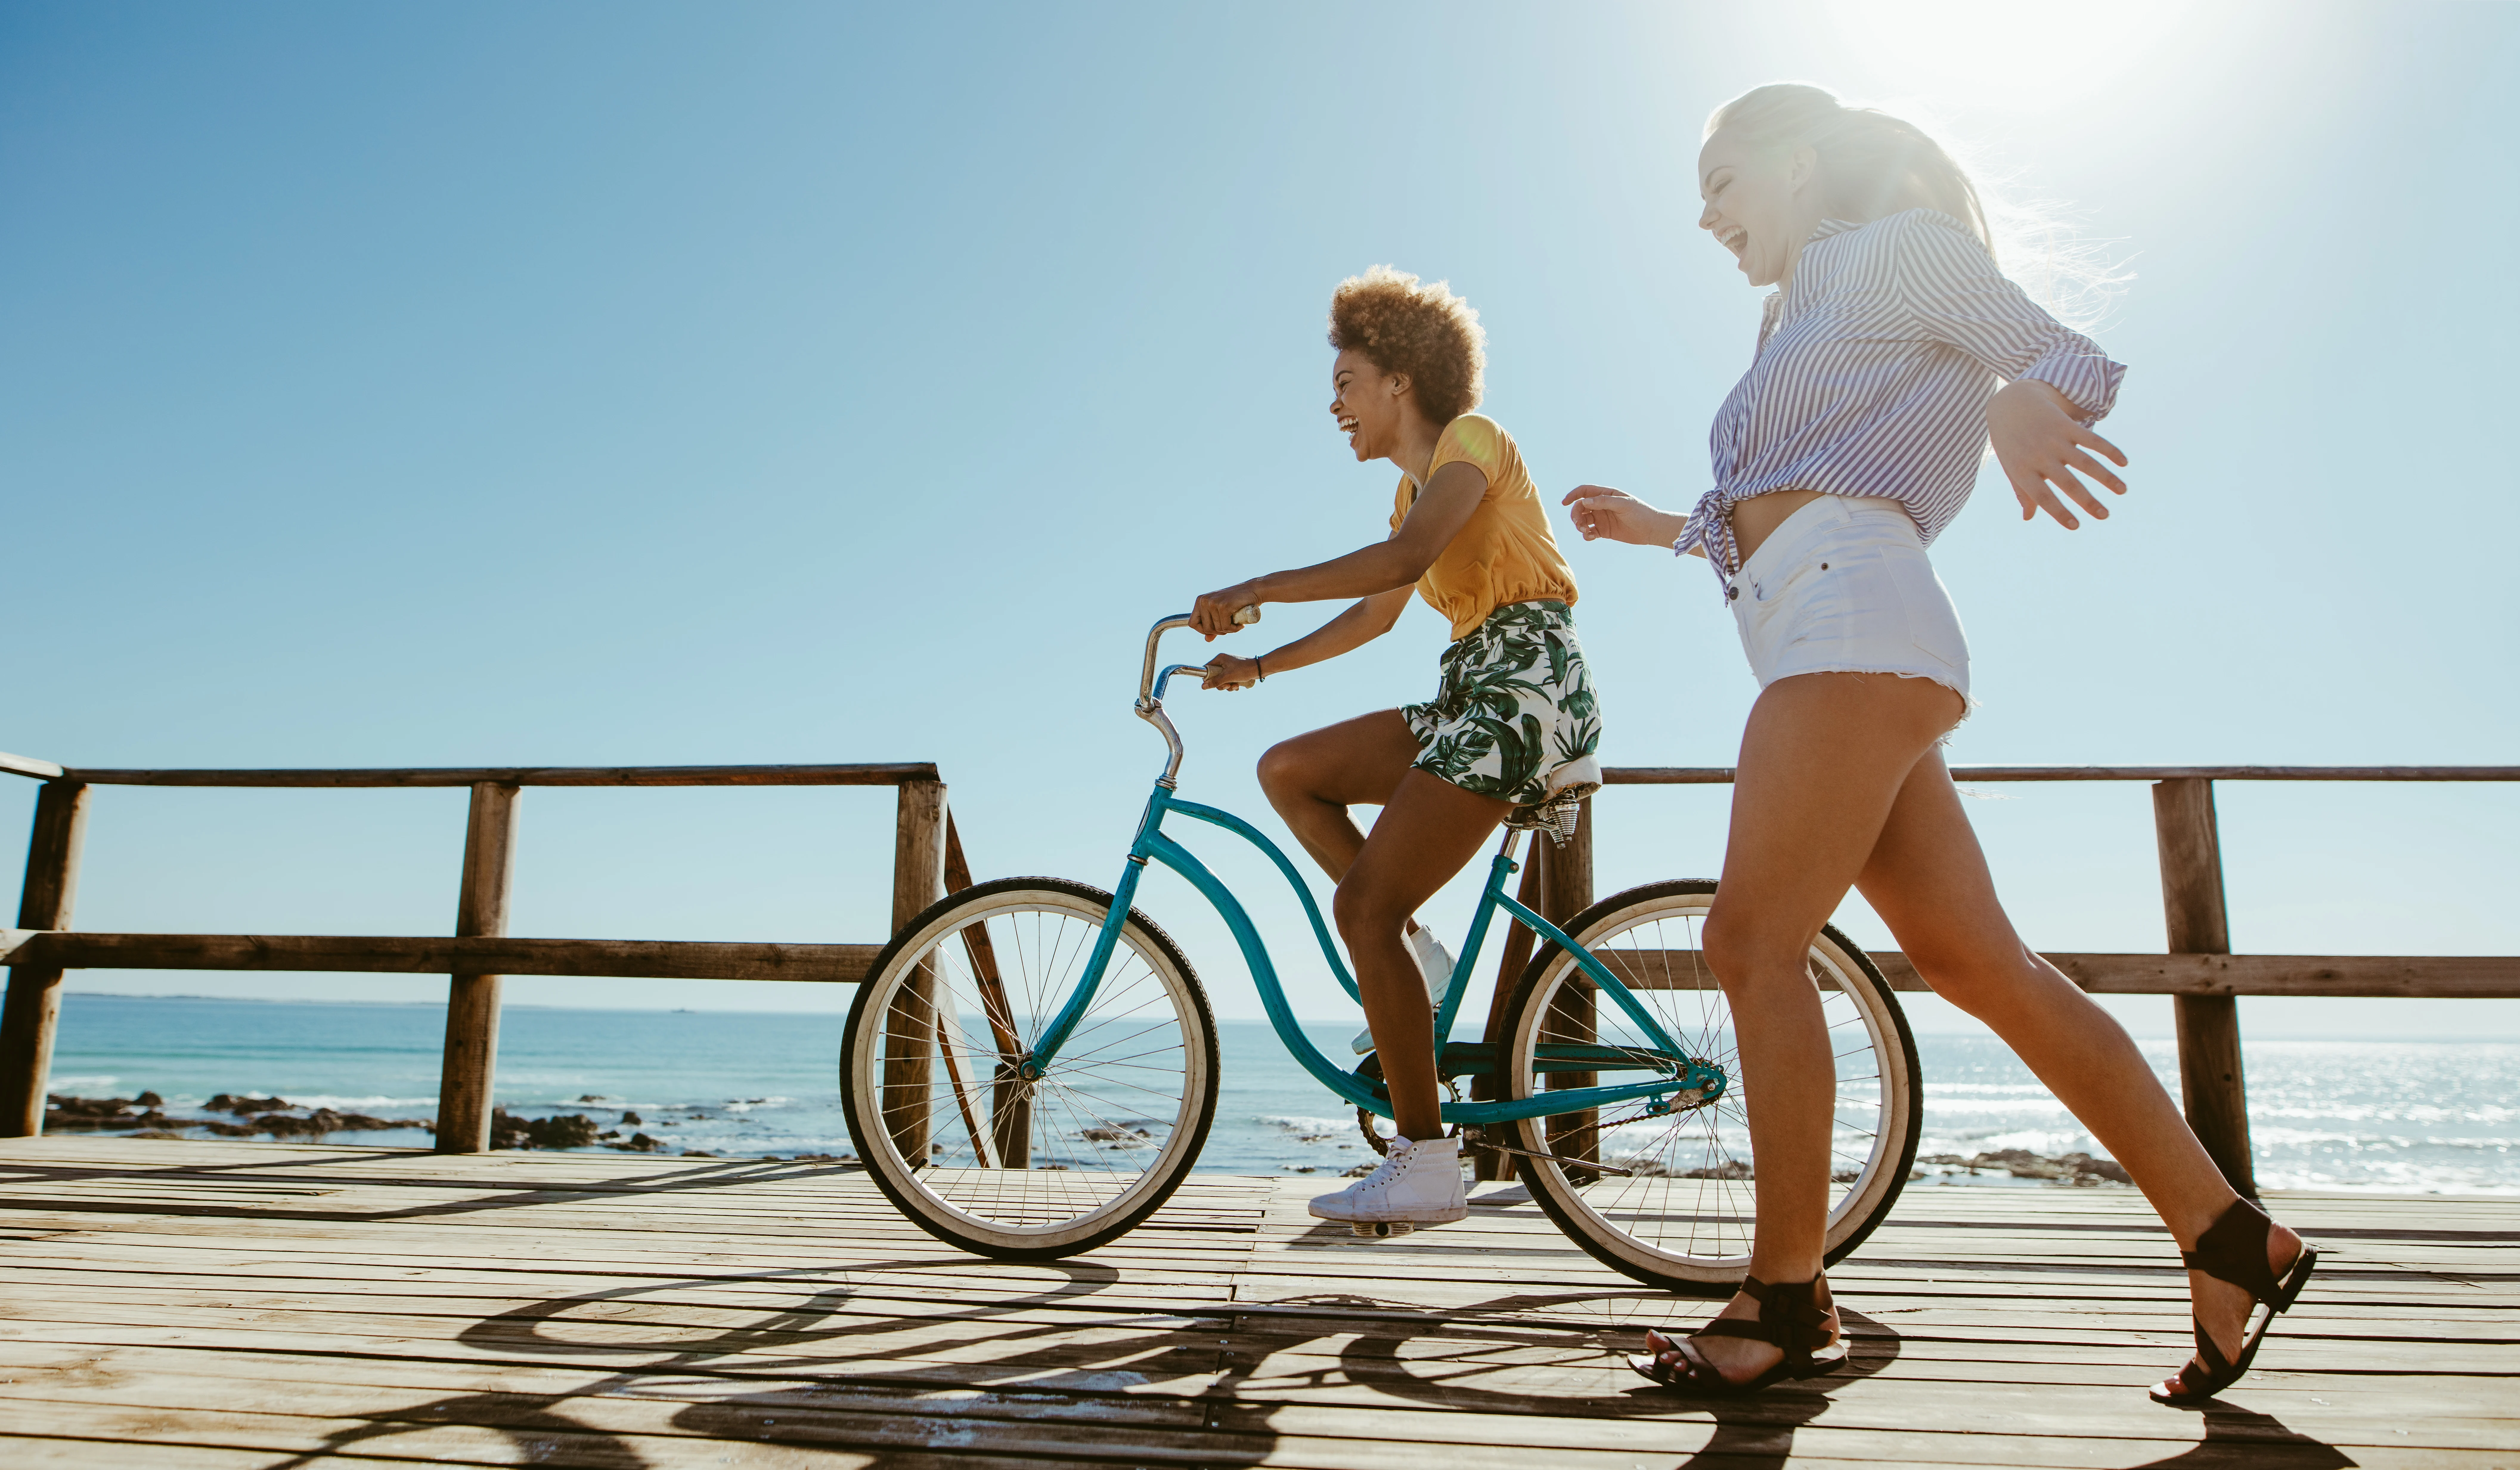 Woman riding a bike on the seashore and other woman walking next to her